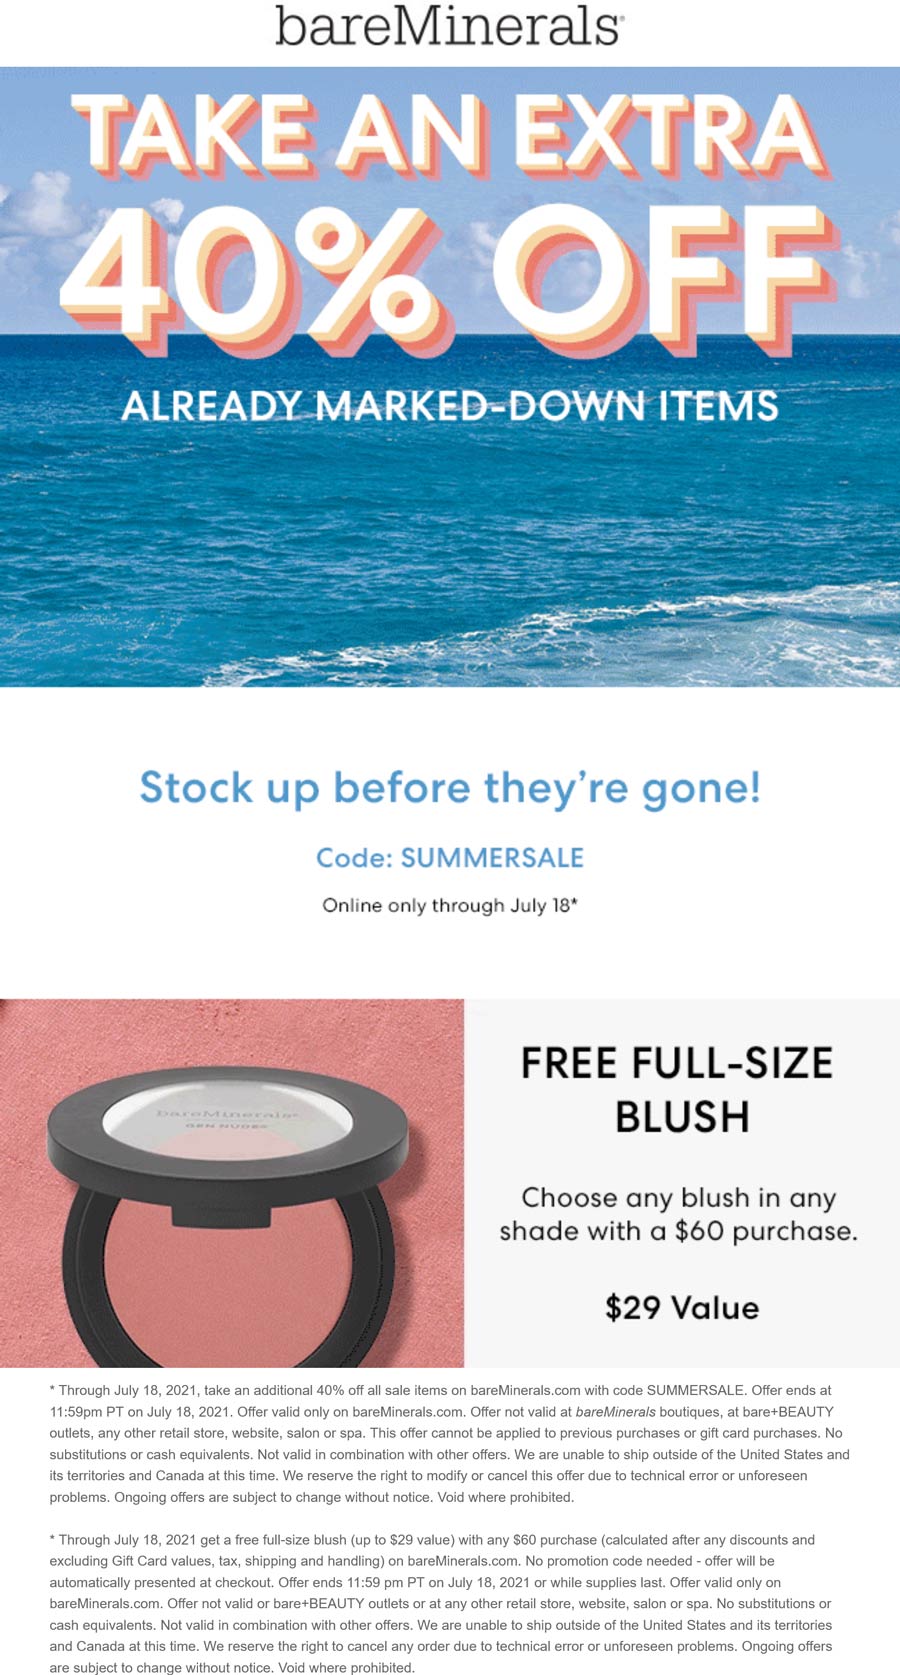 bareMinerals stores Coupon  Extra 40% off sale items at bareMinerals via promo code SUMMERSALE #bareminerals 